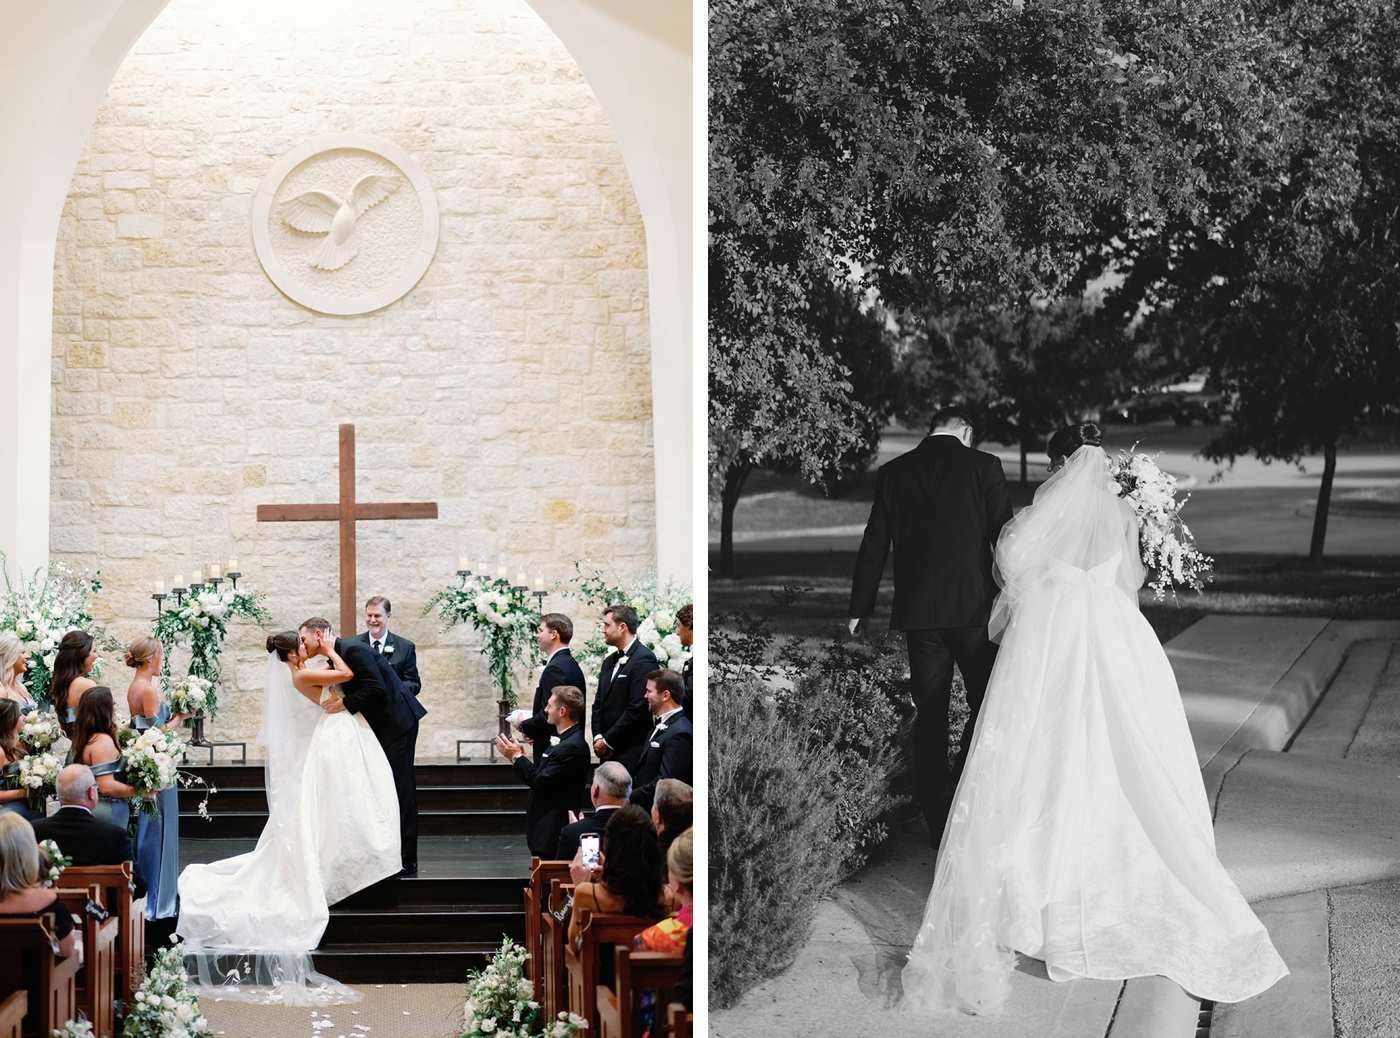 Wedding ceremony in the Smith Family Chapel at Riverbend Church in Austin, TX